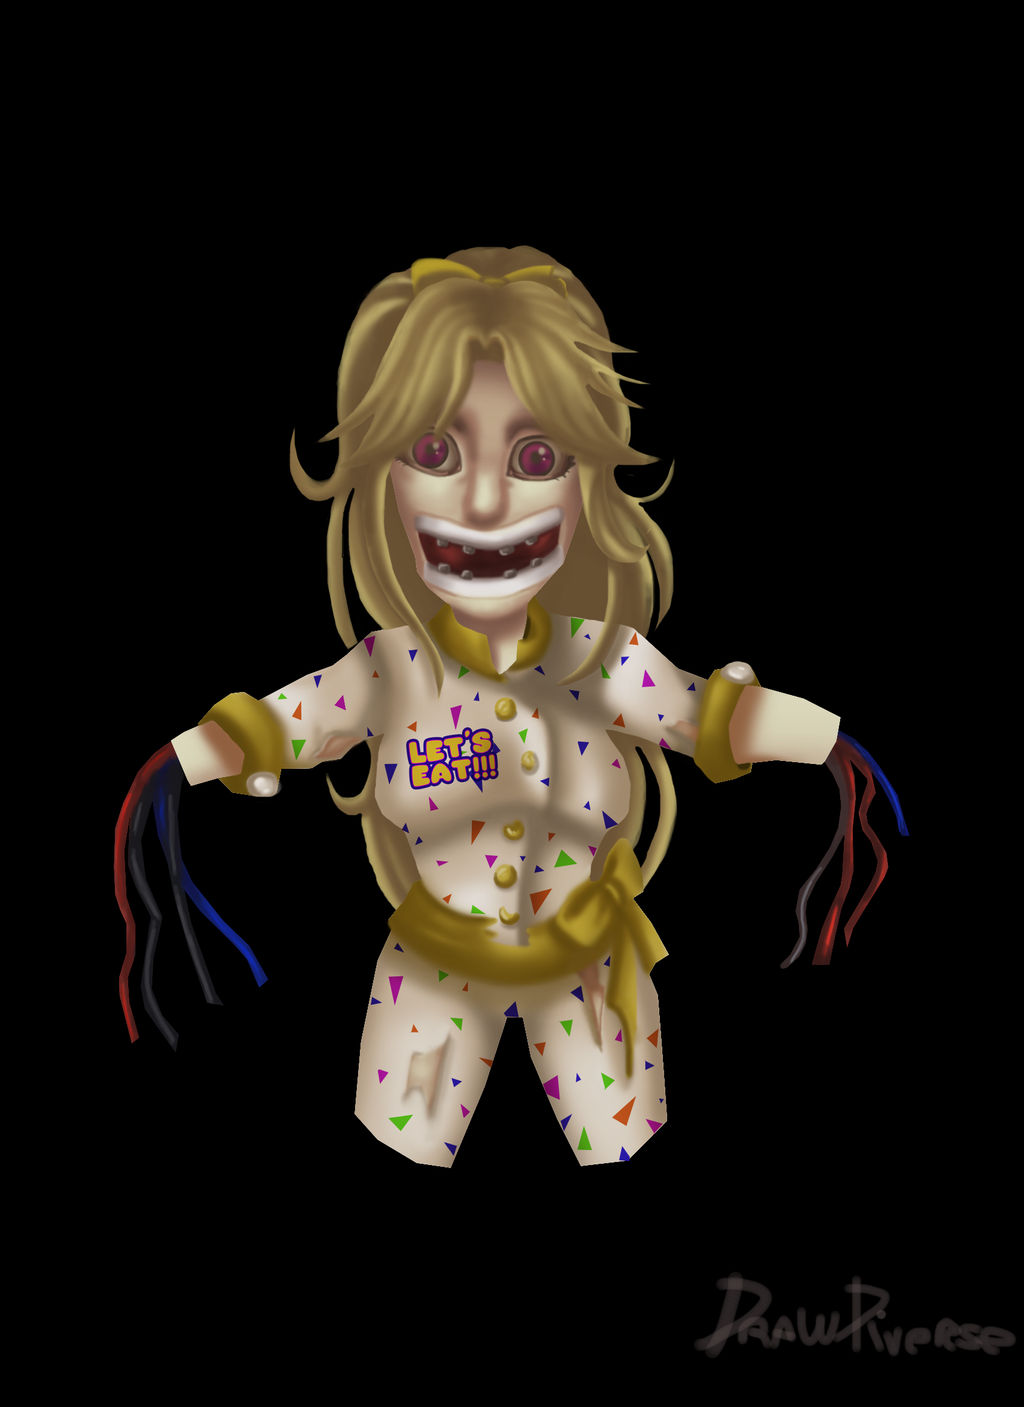 FNAF 2/UCN Icon: Withered Chica by B04TARDE on DeviantArt